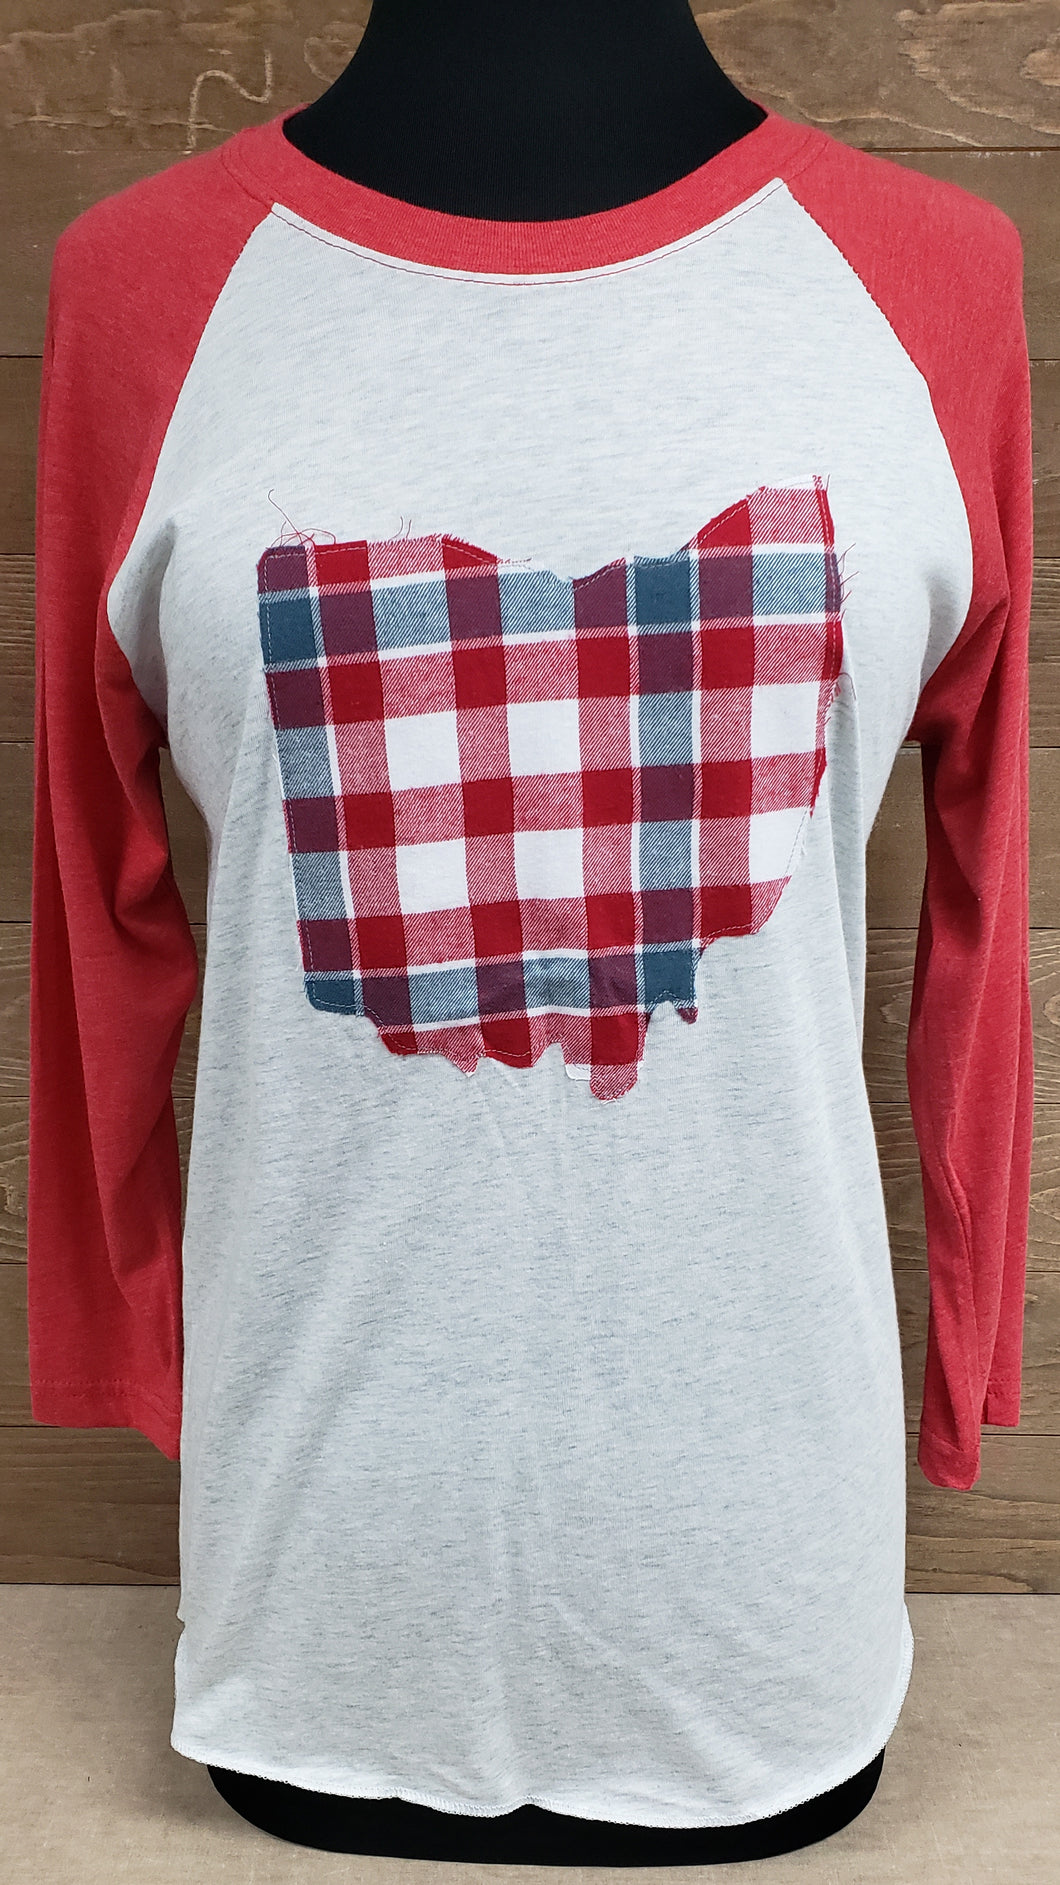 Super soft ohio baseball t-shirt. Show your Ohio pride while wearing this cute t-shirt 